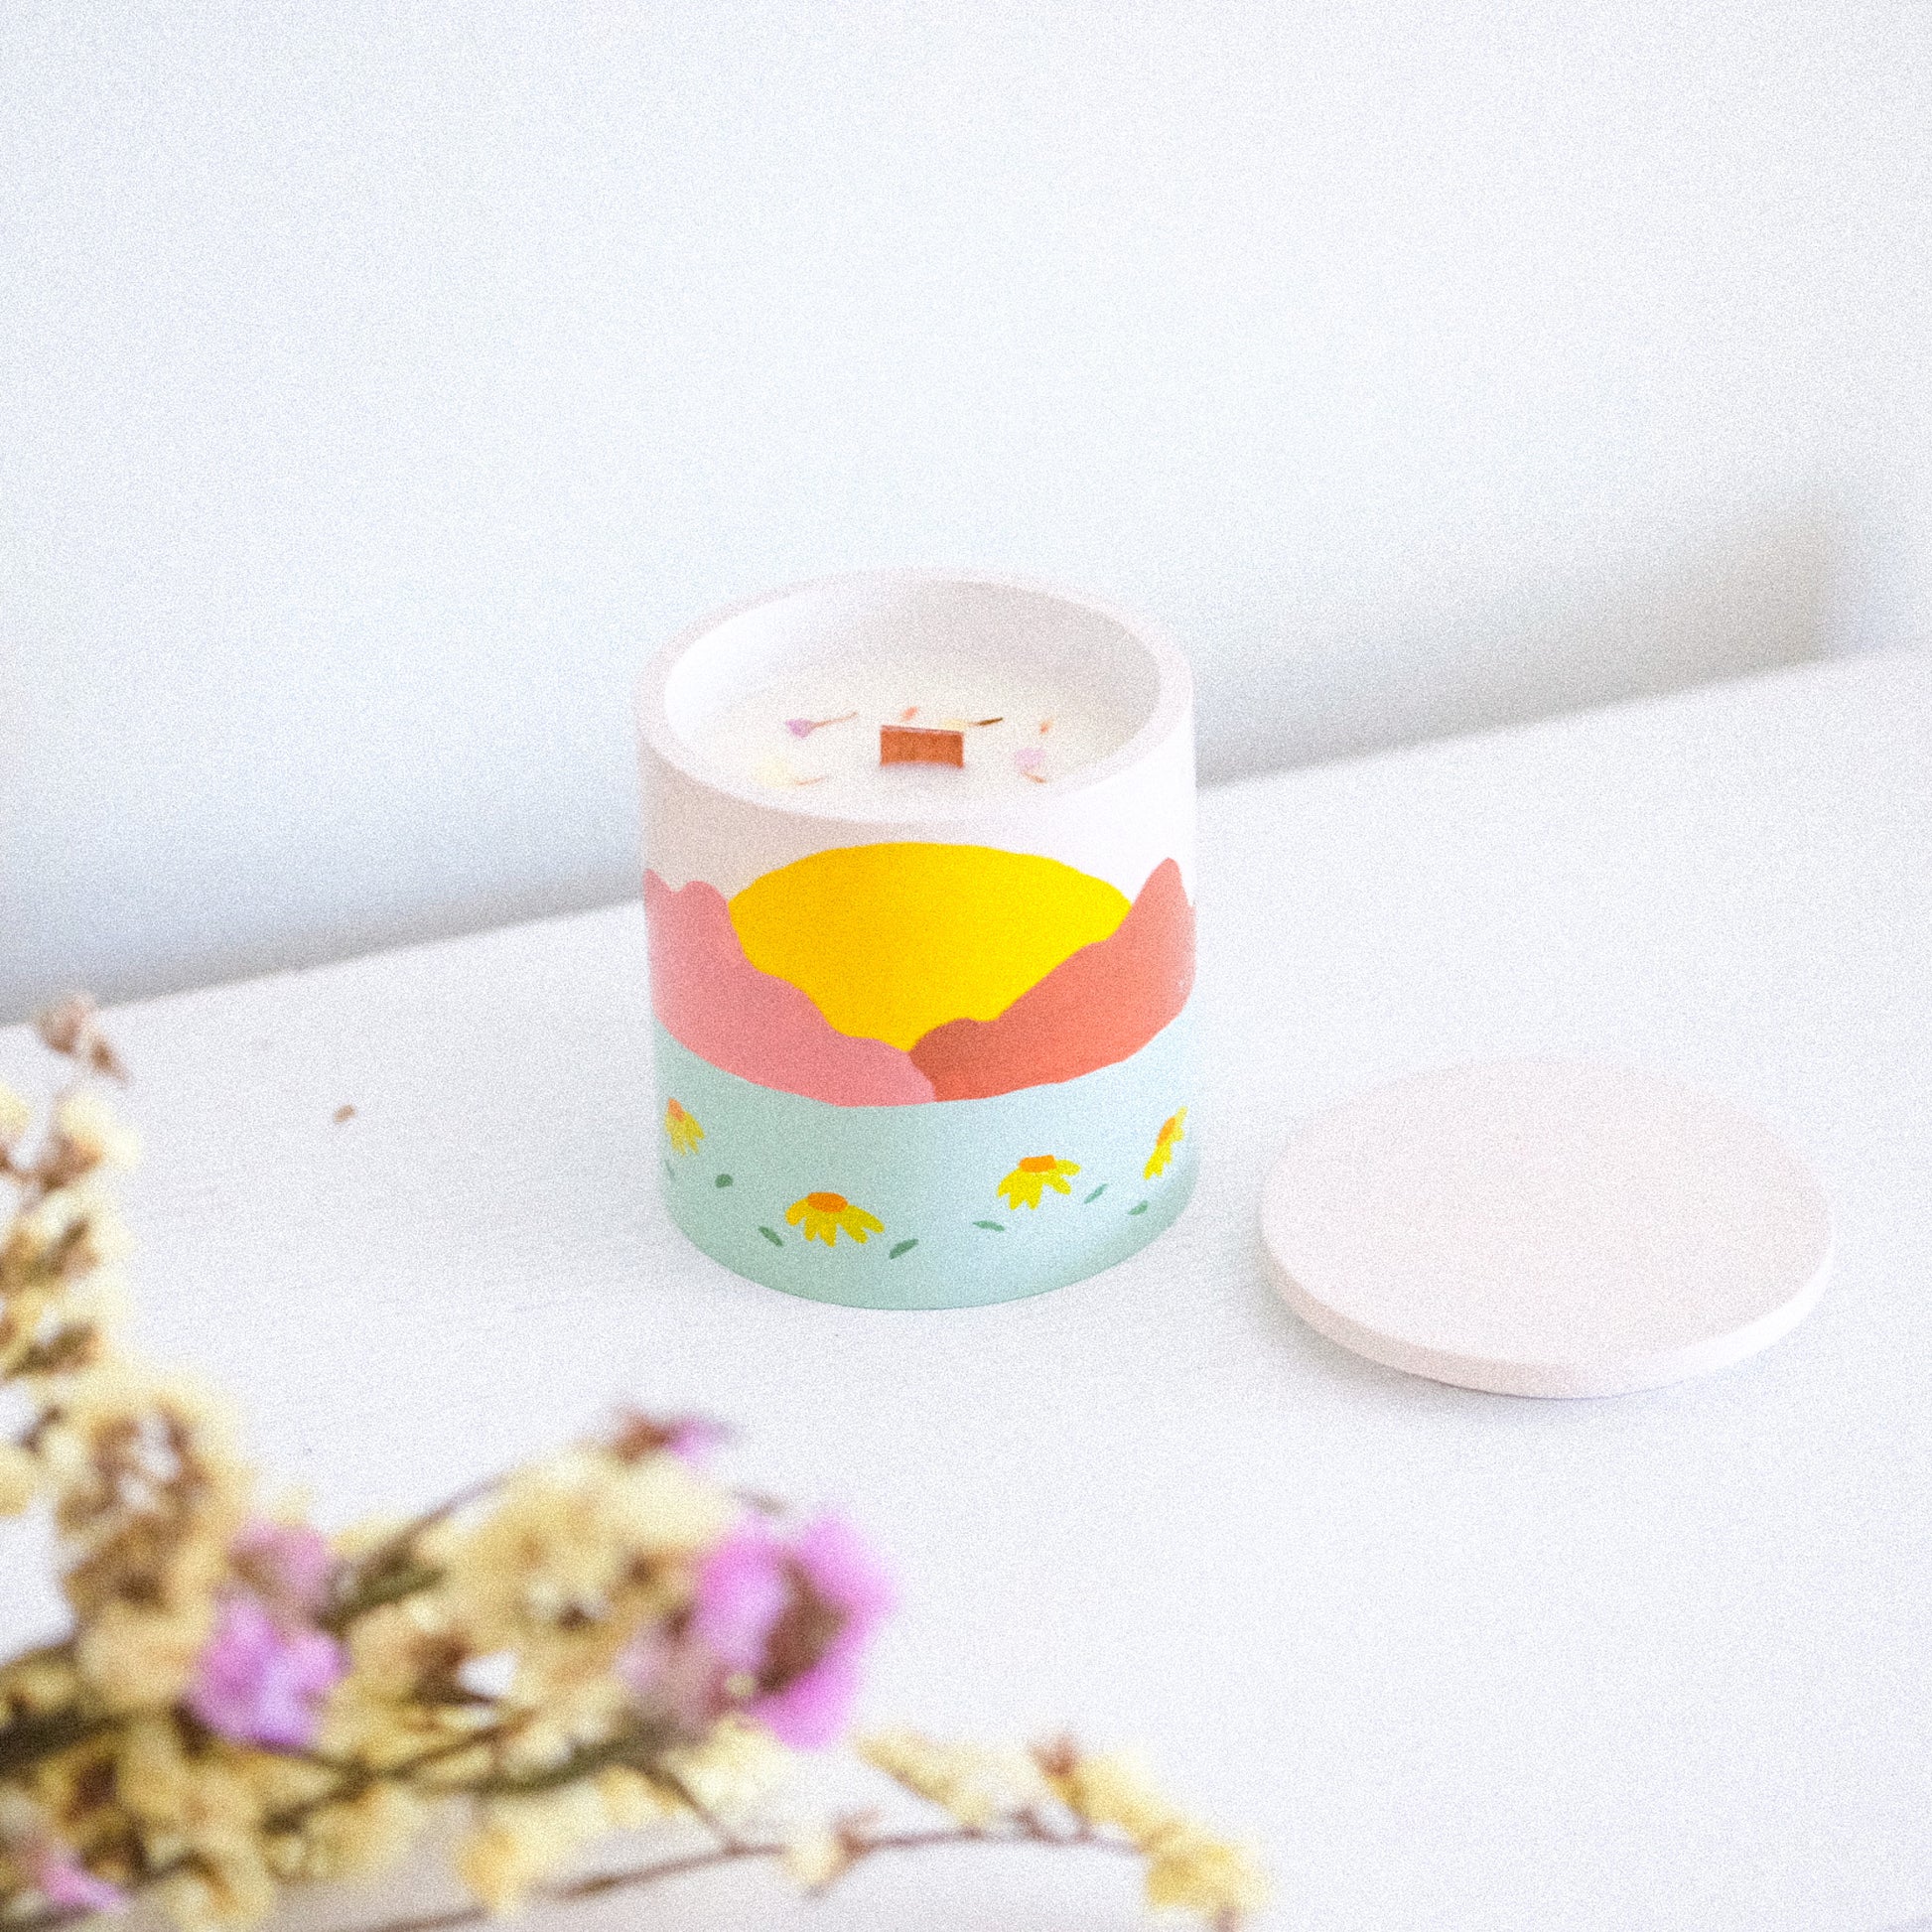 sunrise scented soy candle infused with english pear & freesia natural oils